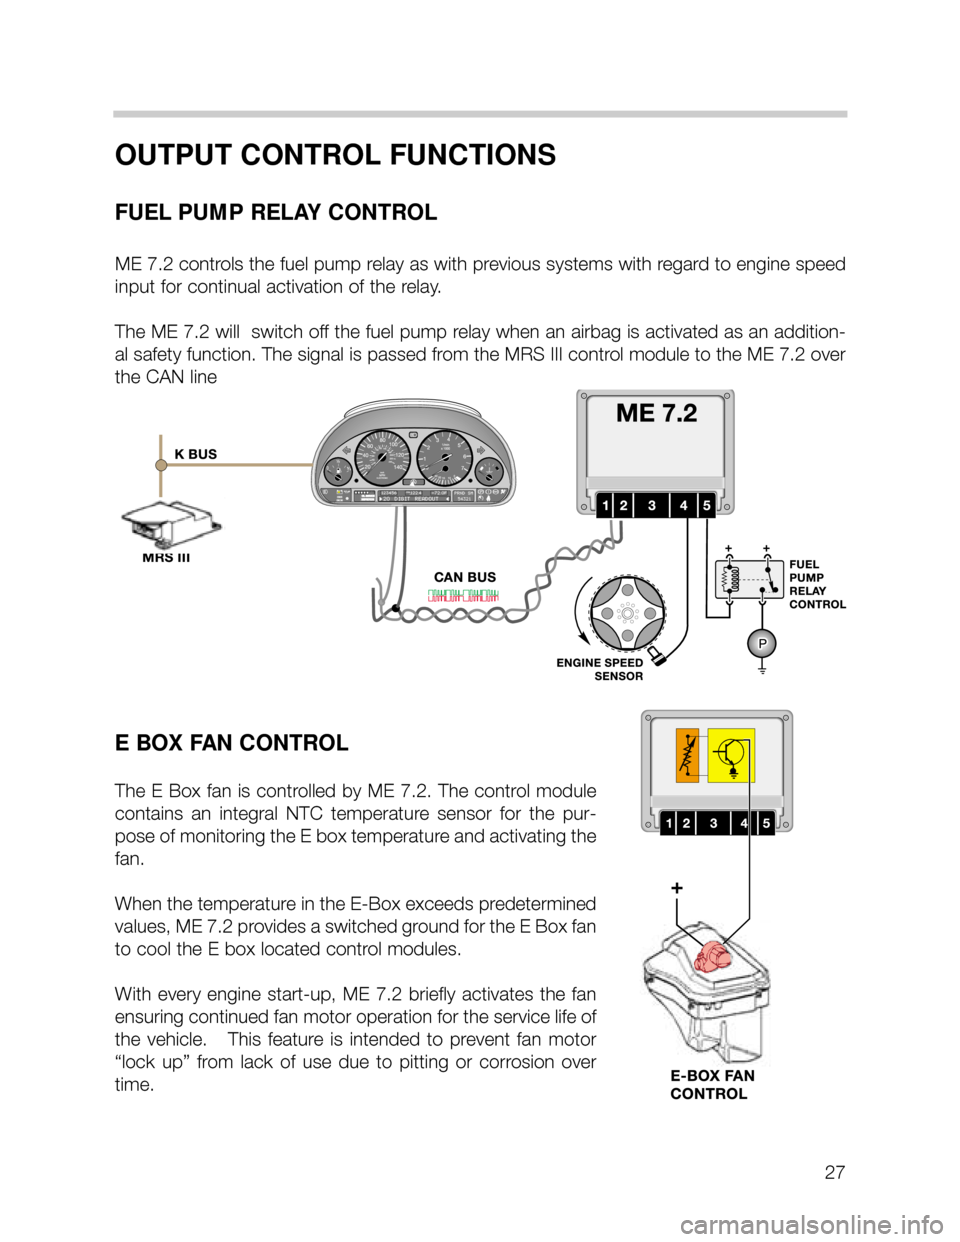 BMW X5 2005 E53 M62TU Engine Owners Manual 27
OUTPUT CONTROL FUNCTIONS
FUEL PUMP RELAY CONTROL
ME 7.2 controls the fuel pump relay as with previous systems with regard to engine speed
input for continual activation of the relay.  
The ME 7.2 w